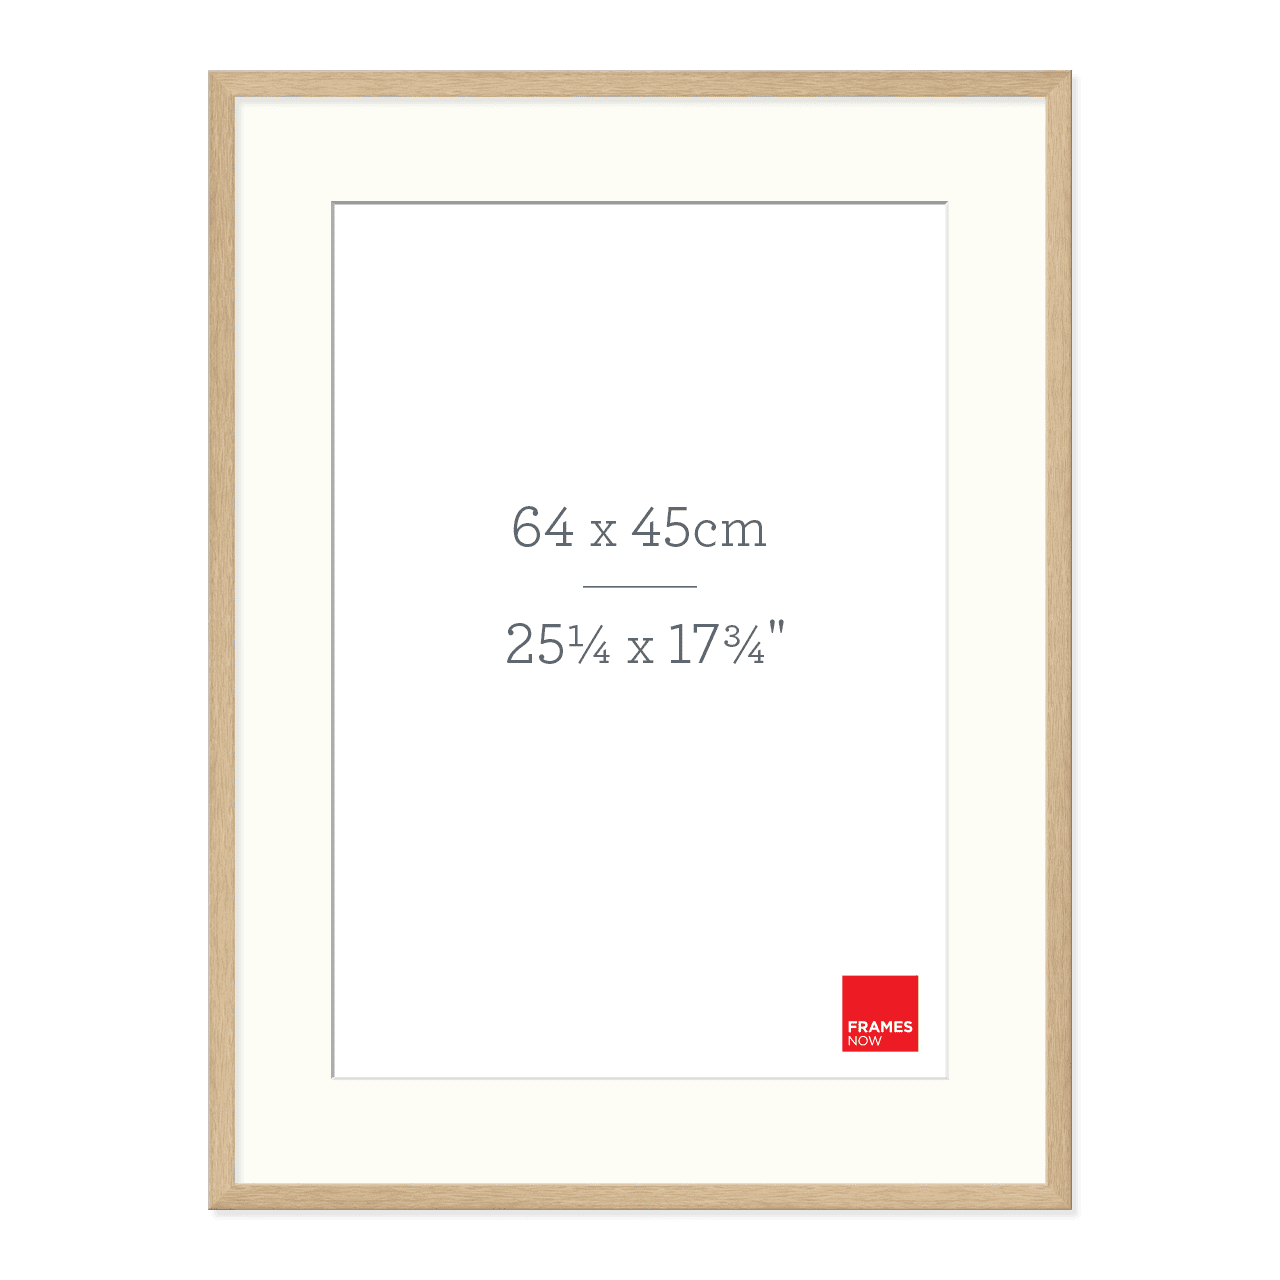 Premium Natural Oak Picture Frame with Matboard for 64 x 45cm Artwork